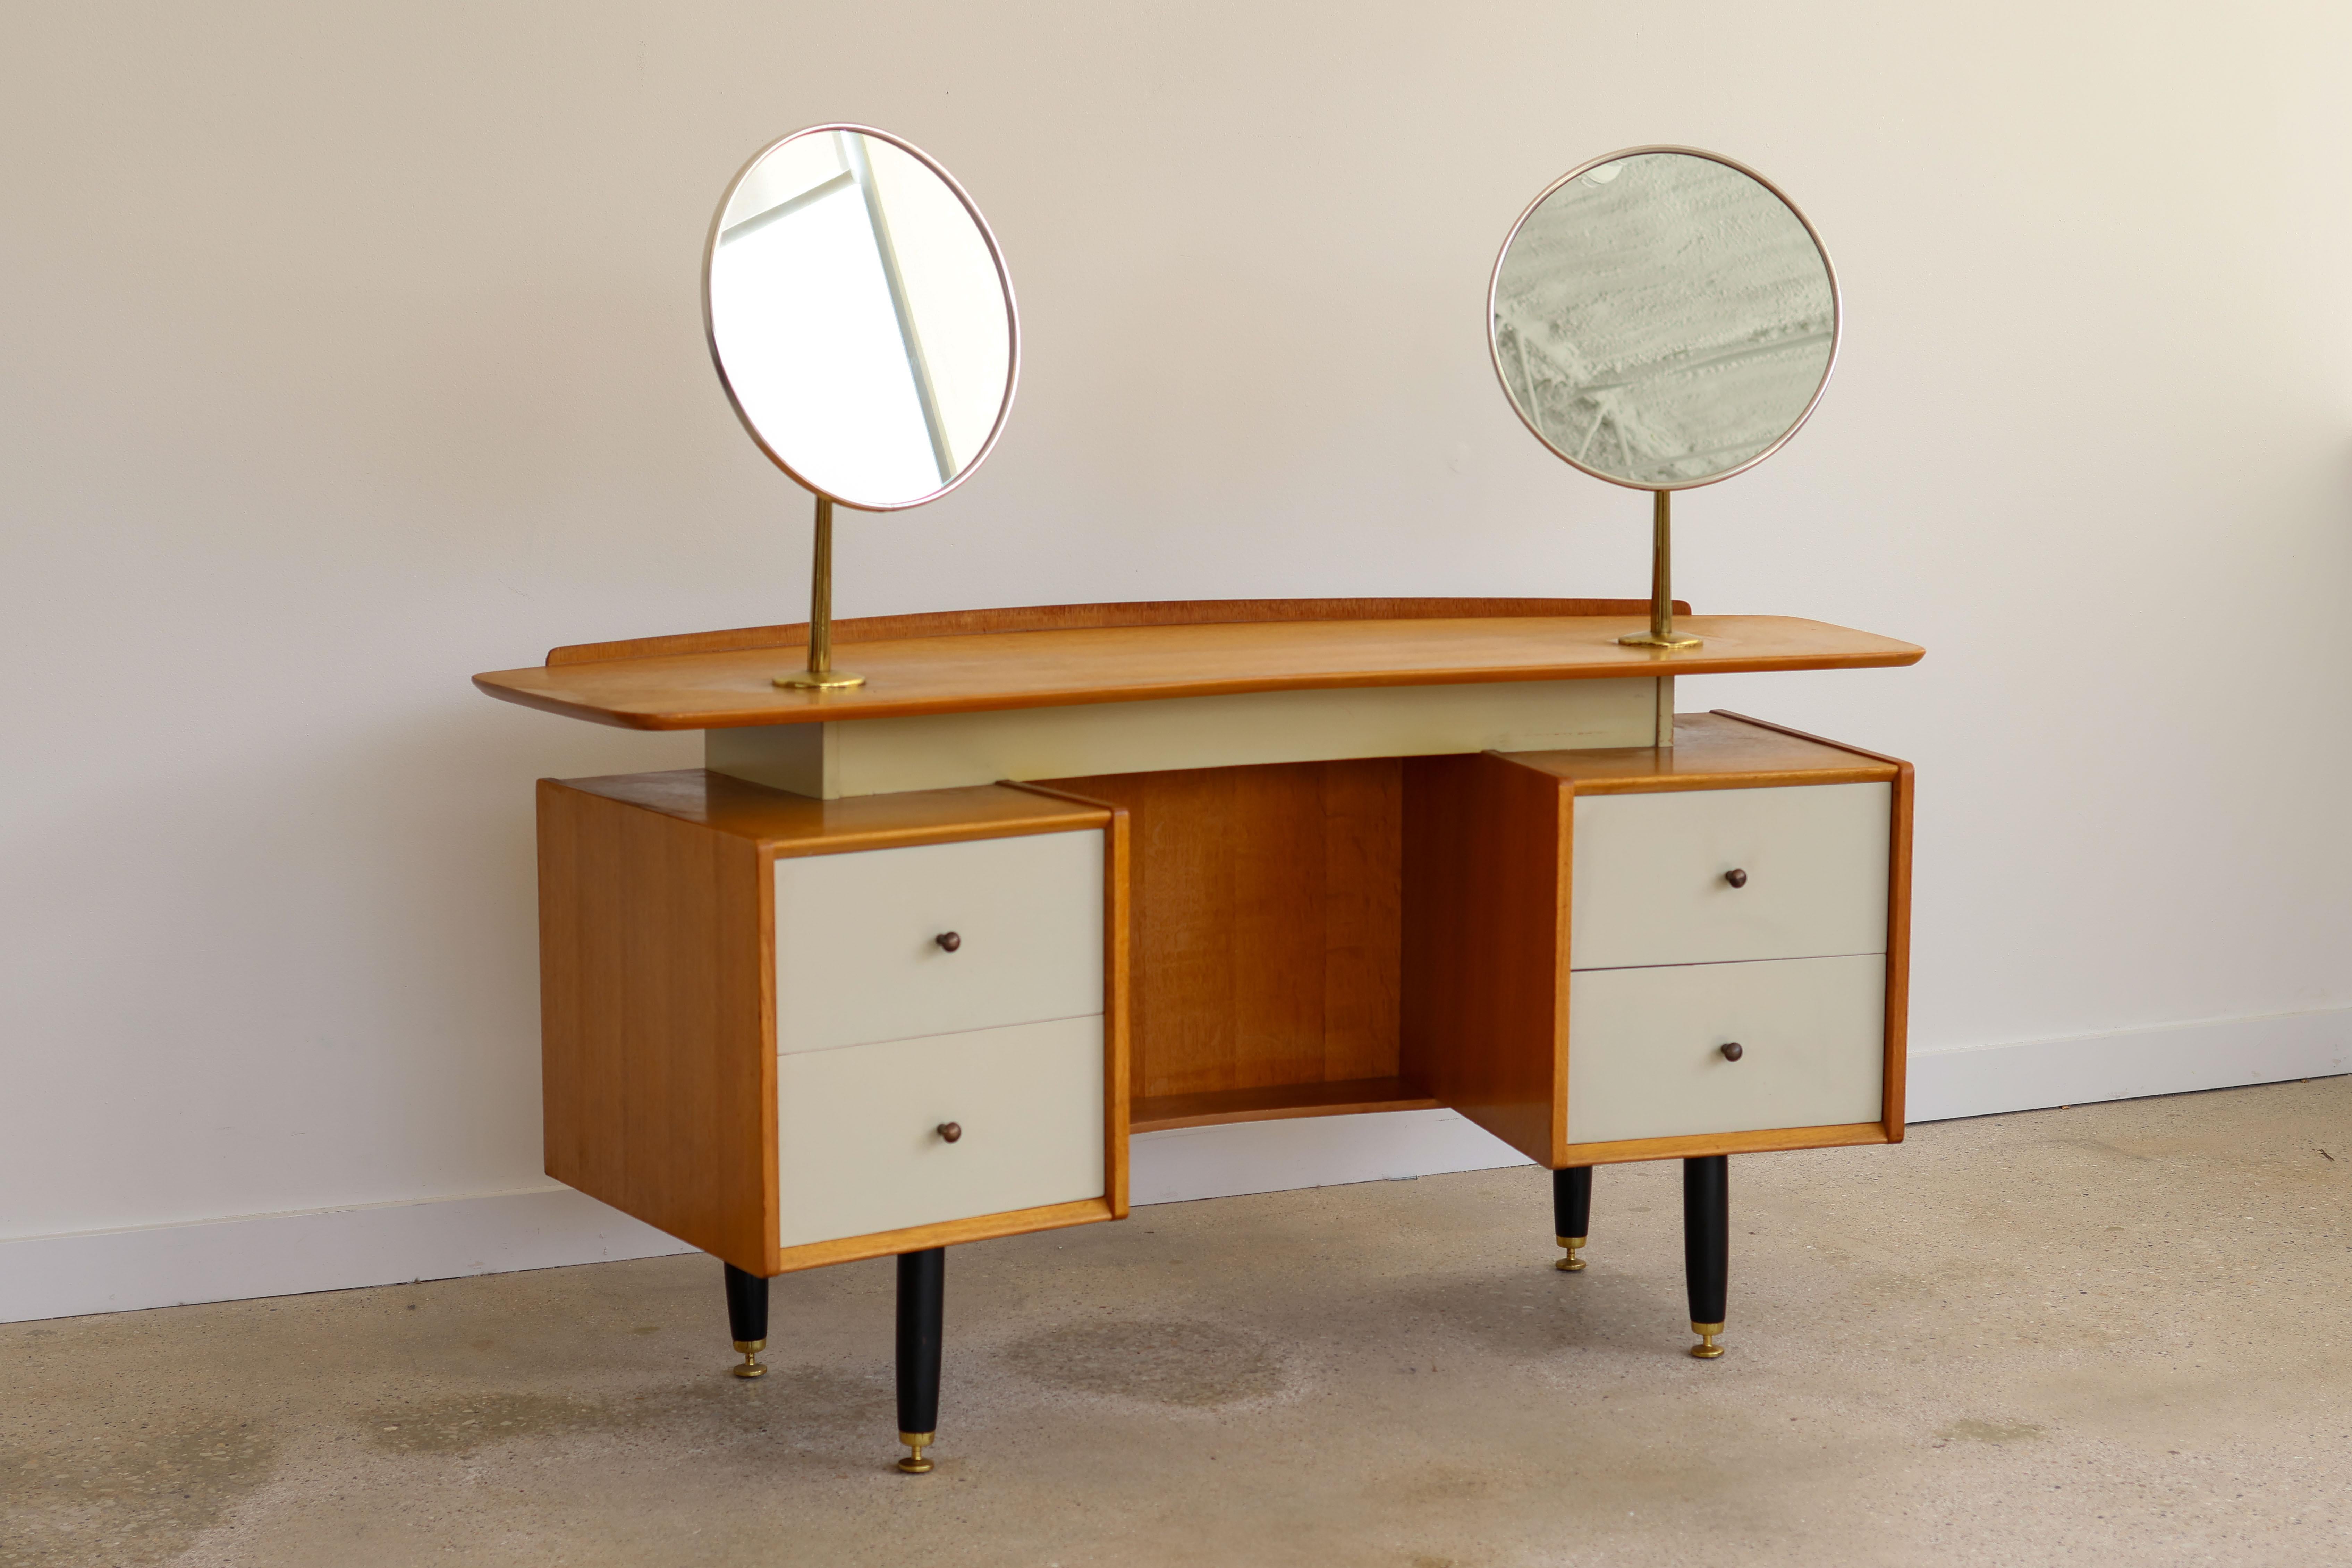 Mid Century Modern double mirror boomerang oak vanity.
Designed by E. Gomme for G-Plan.
Just imported from England.
Contrasting white lacquered drawers and ebonized wood legs.
Floating top.
Two fully swiveling mirrors on slender brass poles - giving